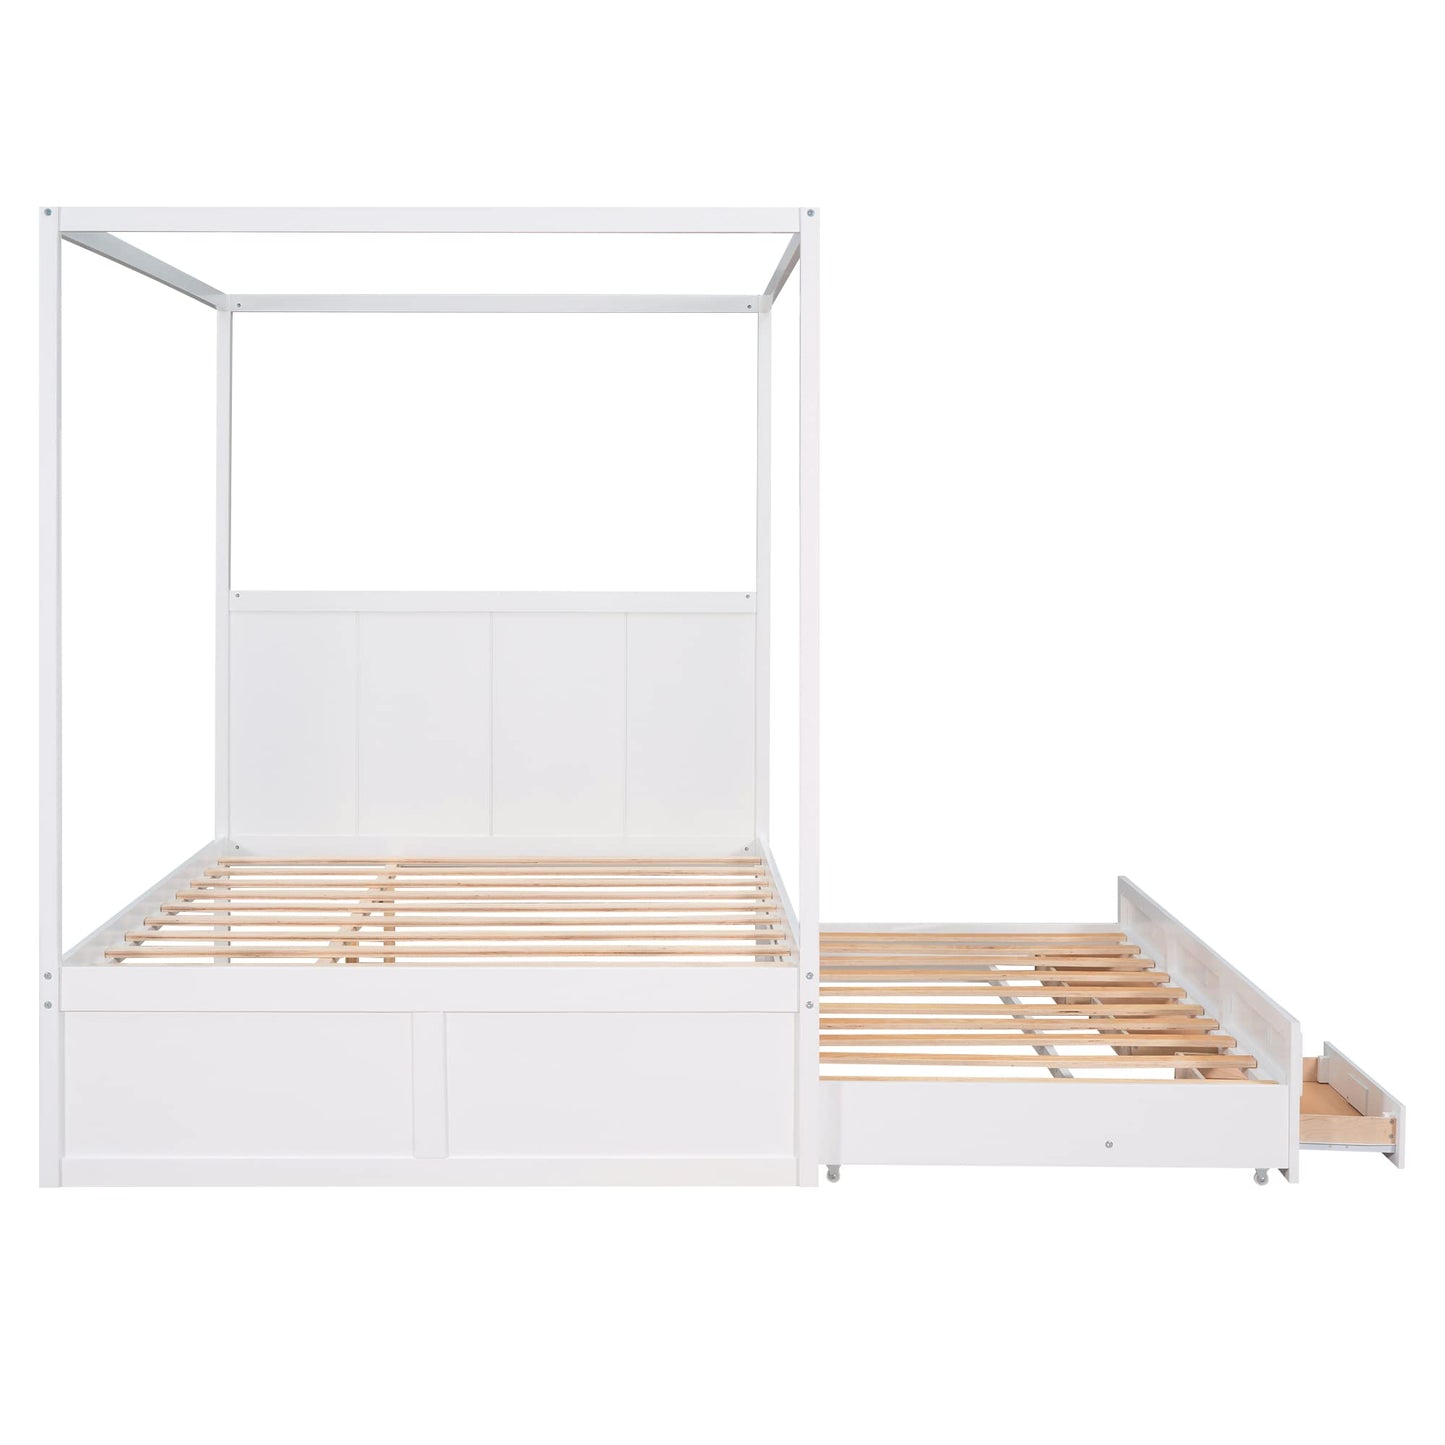 Favfurish Queen Size Canopy Platform Bed with Twin-Size Trundle and Three Storage Drawers,Easy to Assemble,Wood Bed-Frame for Children Teens Adults,Suitable for Bedroom,White